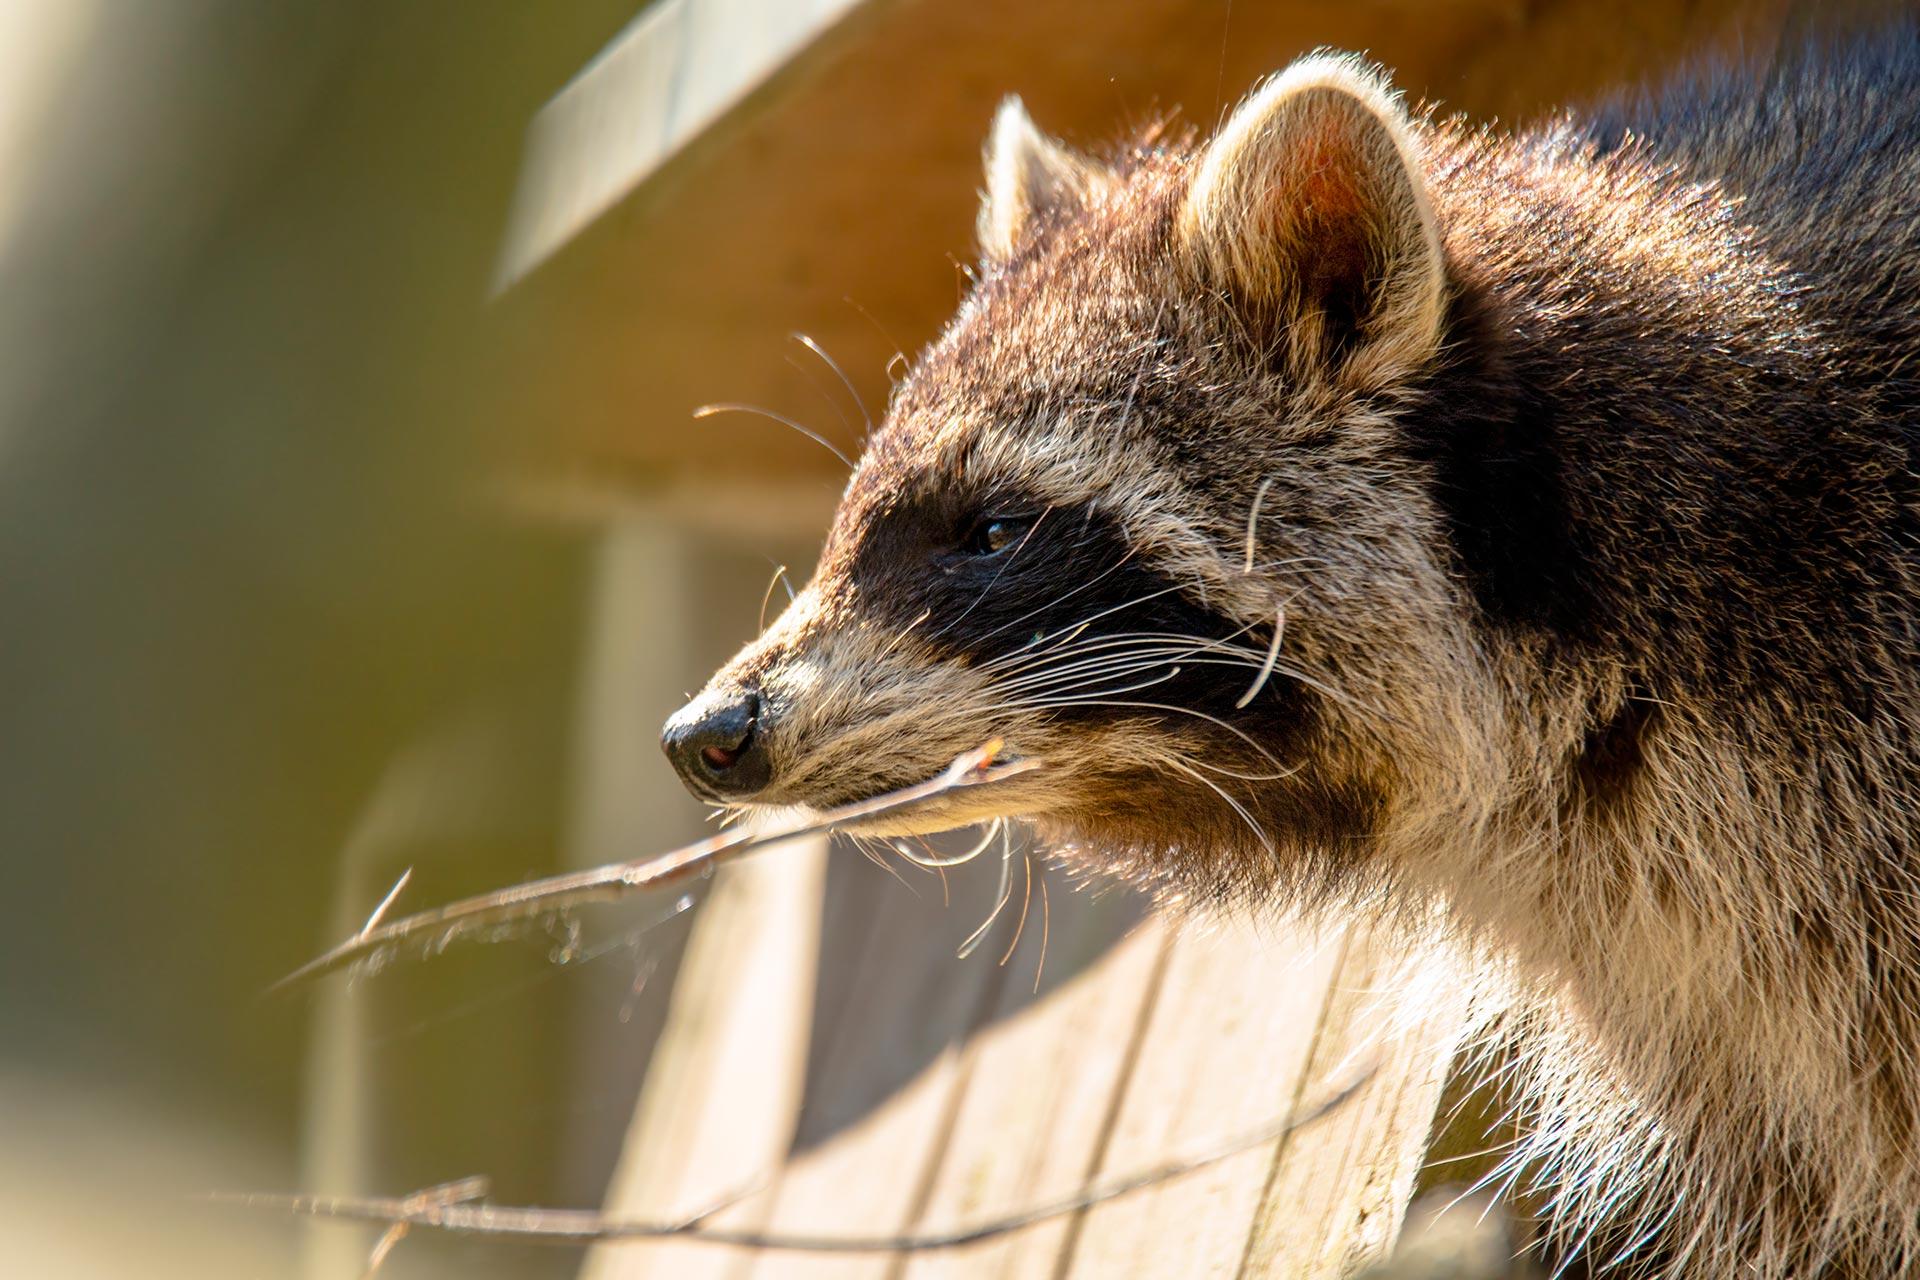 Pilgrim Pest Professionals is an expert raccoon trapper and offers raccoon trapping services.